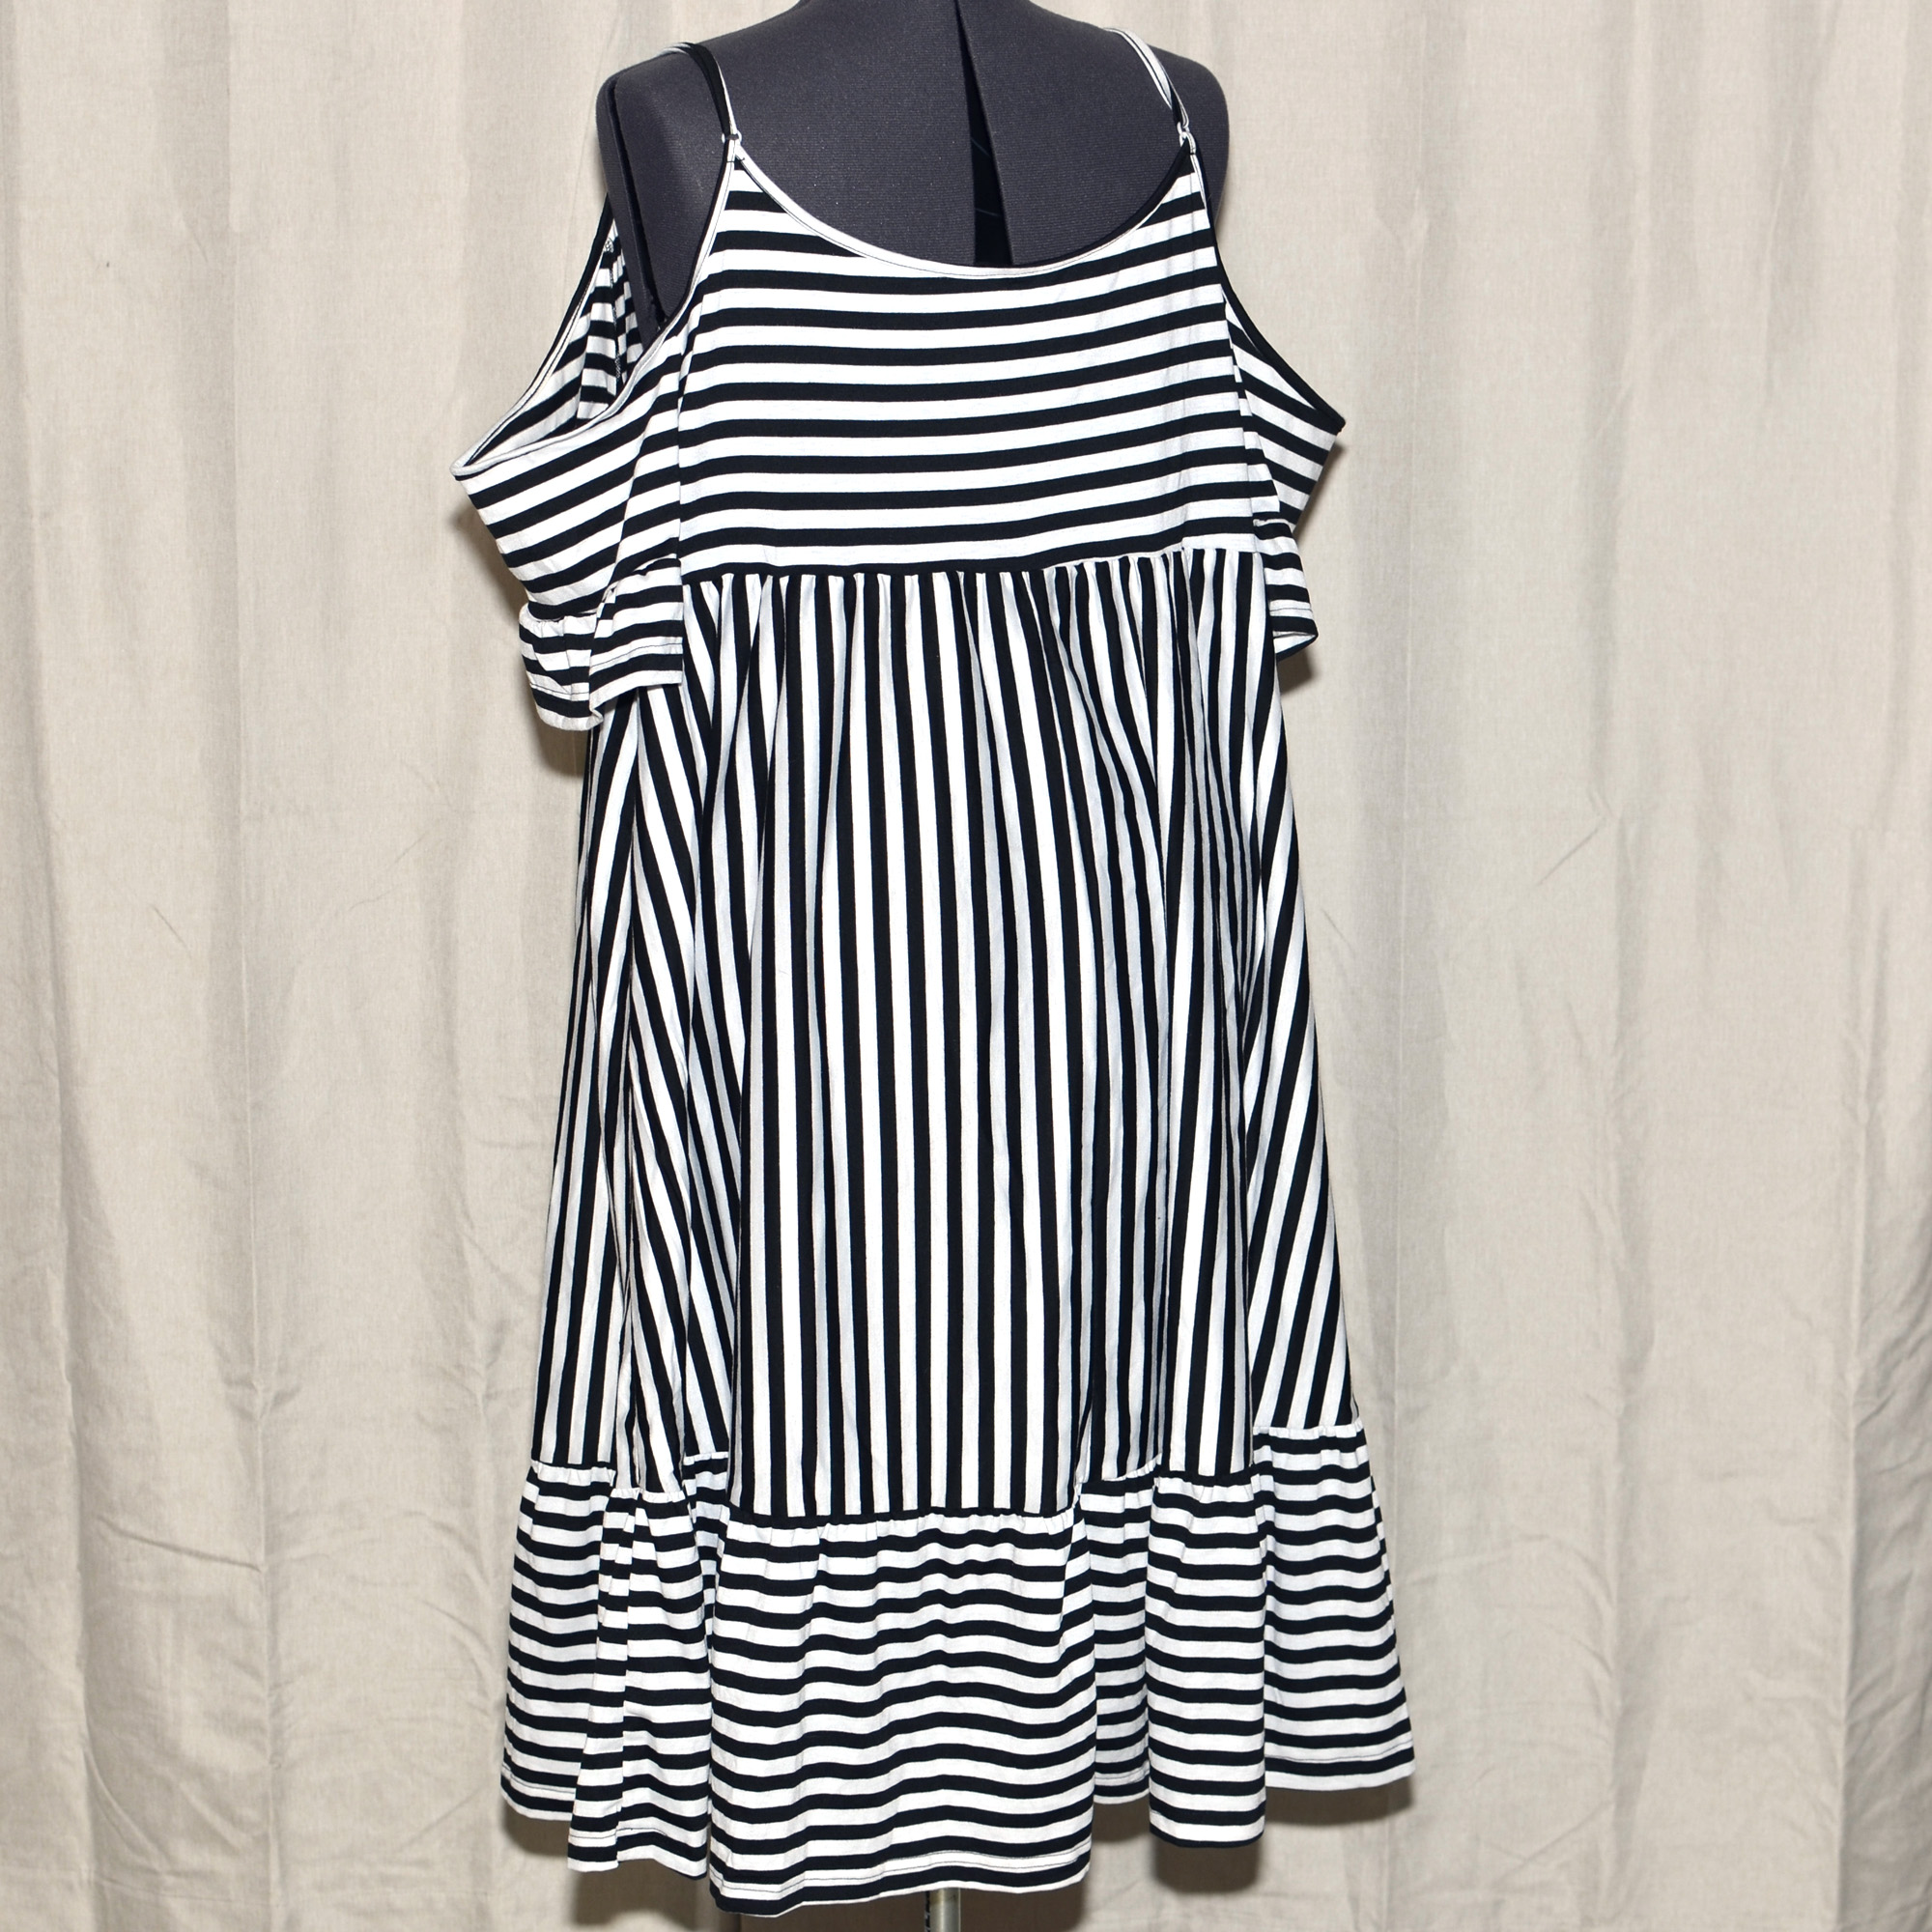 Black and white striped cold-shoulder sundress with ruffle hem, plus size from Shein.